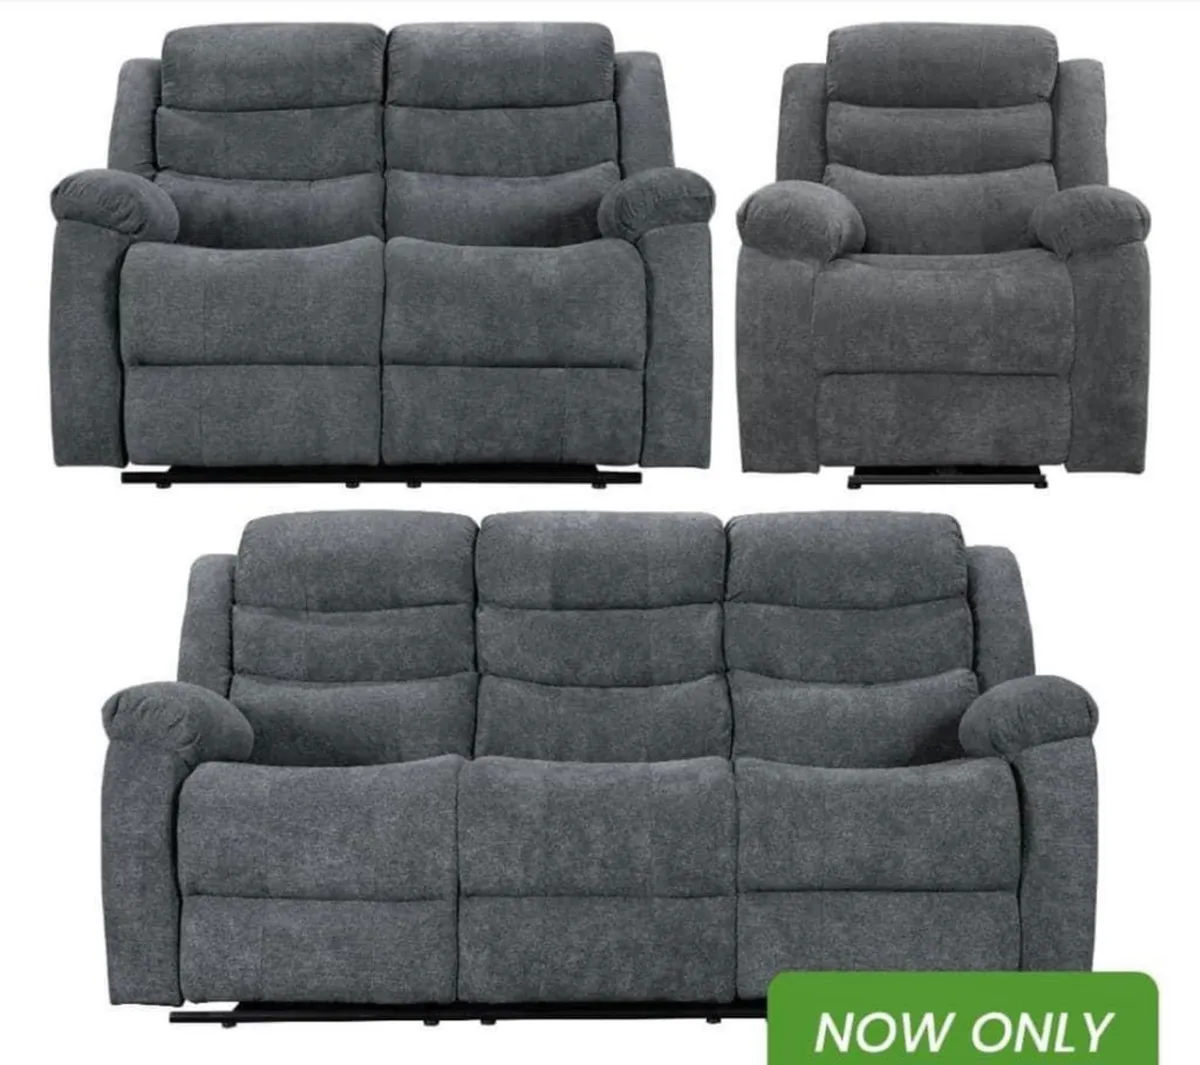 New Grey Fabric Recliner Sofas - Image 1